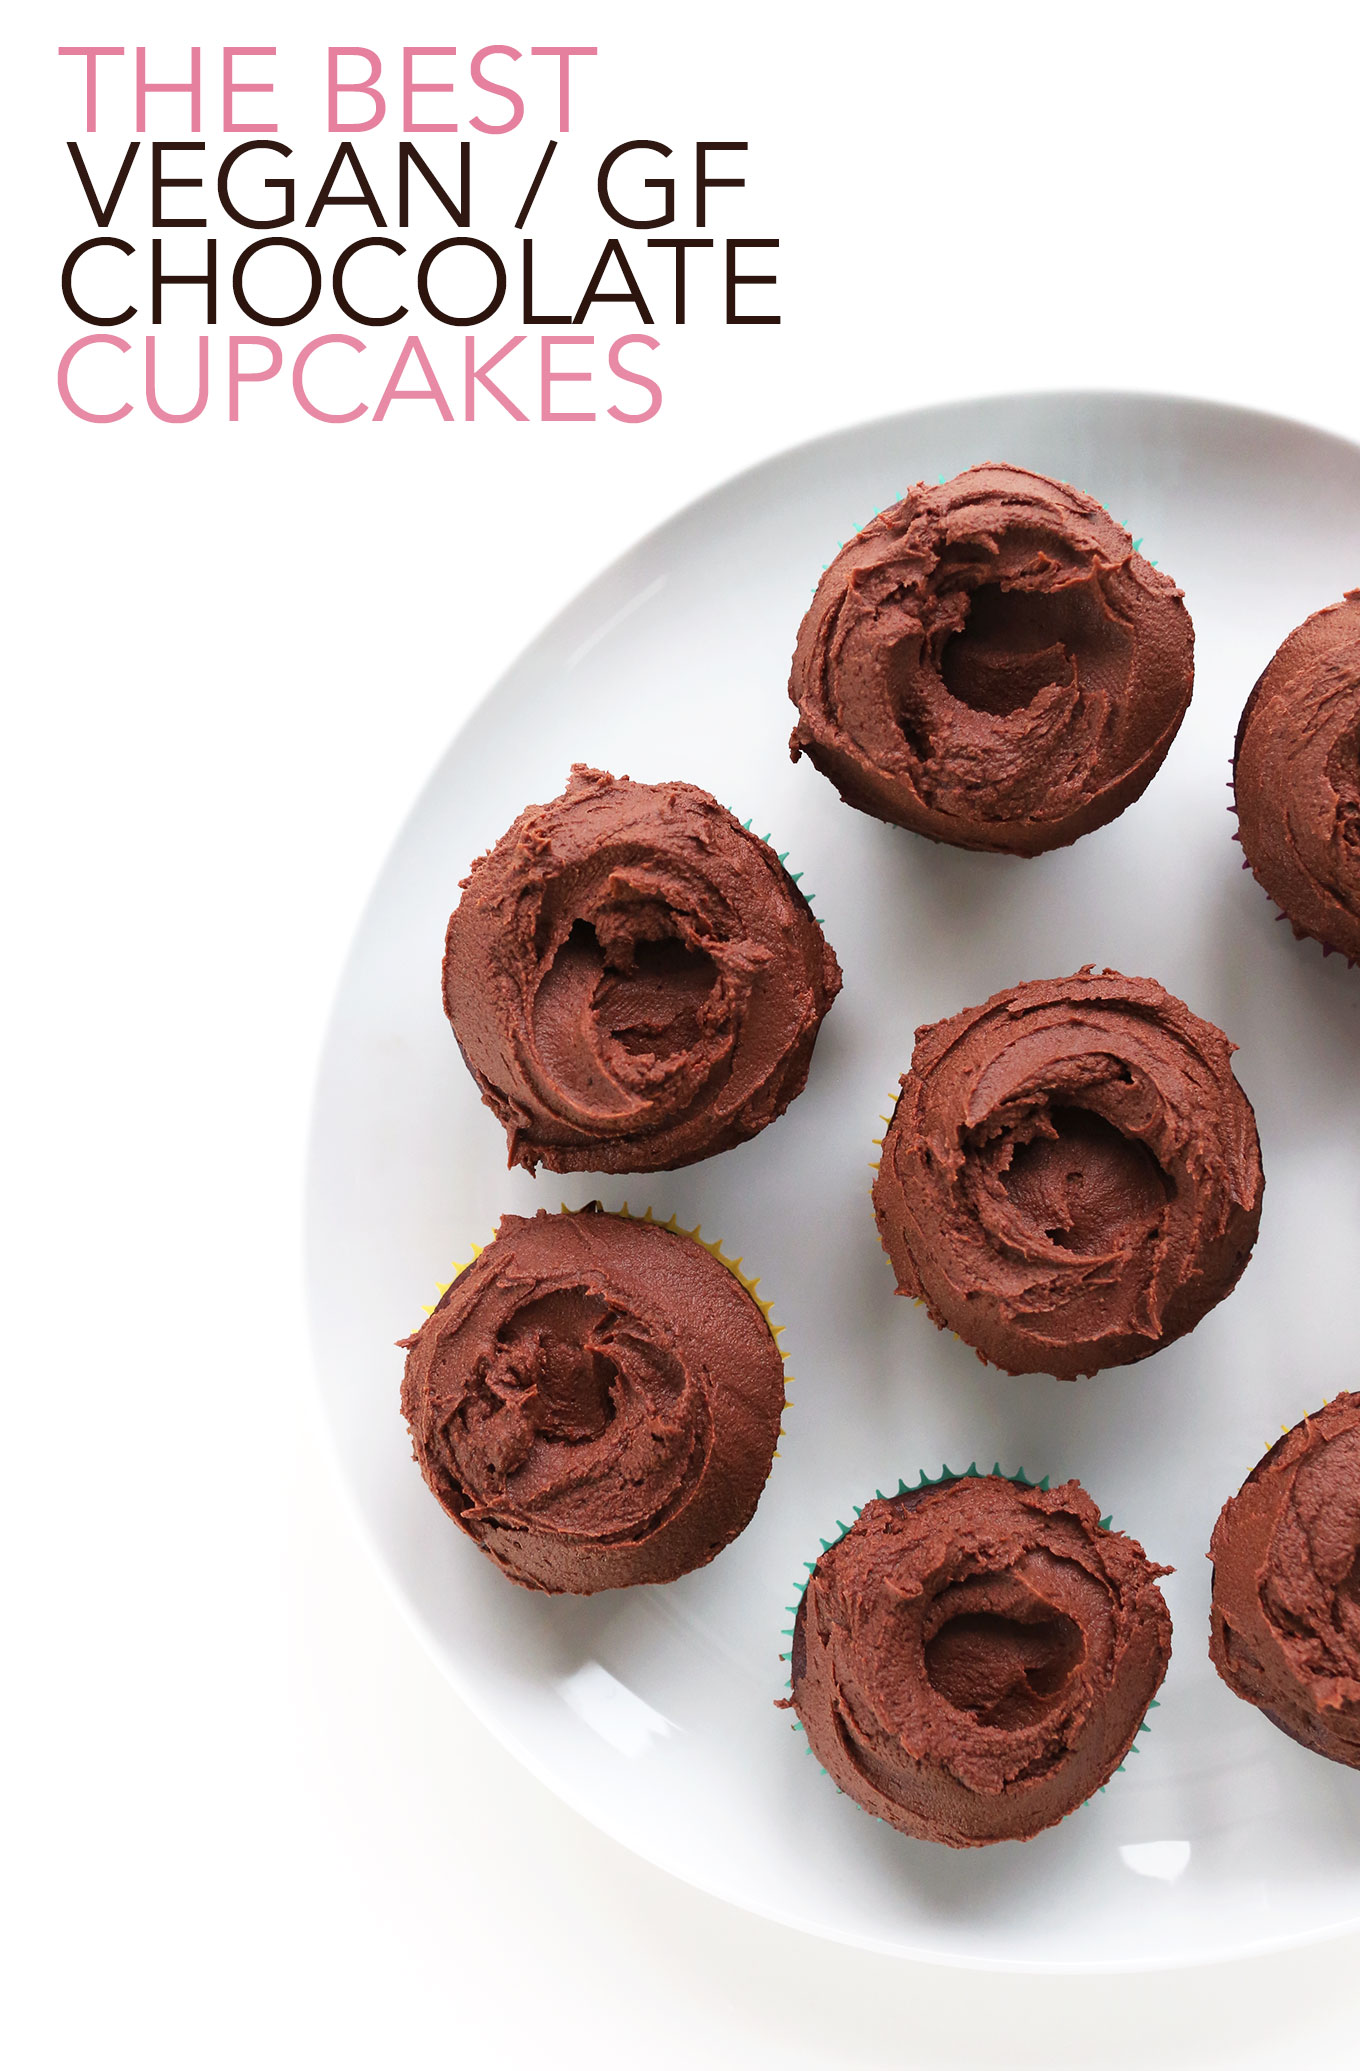 Plate filled with our moist Vegan Gluten-Free Chocolate Cupcakes recipe